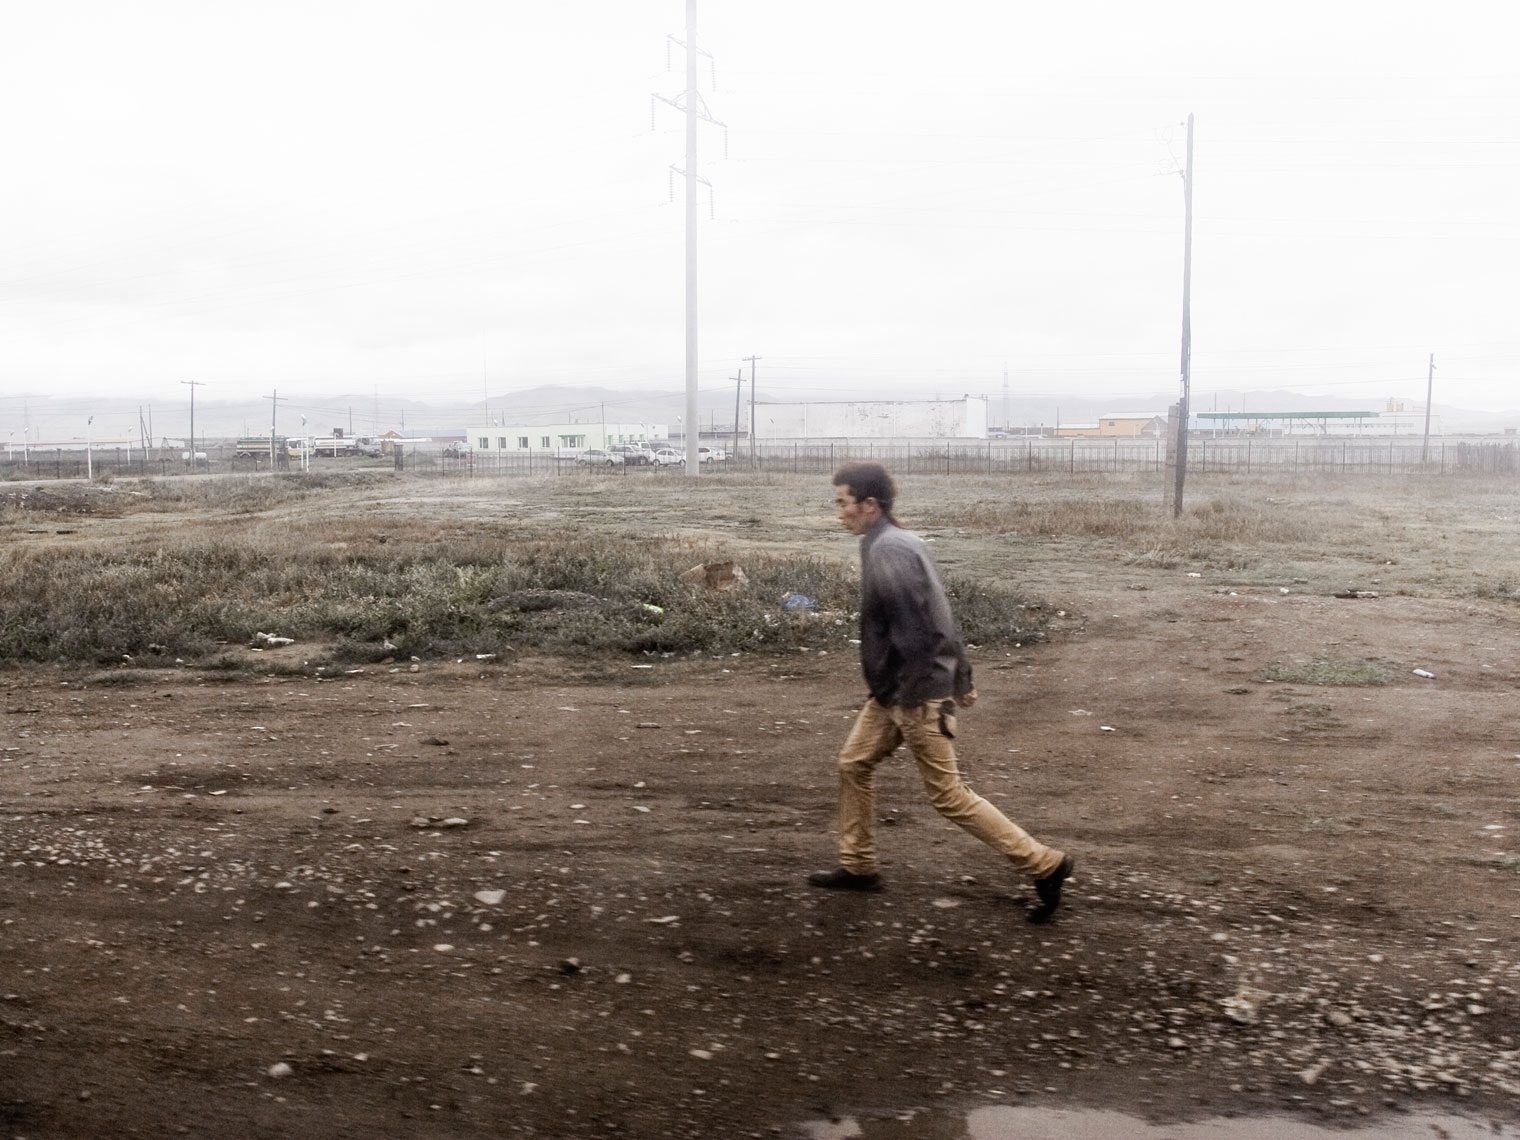 MONGOLIA. Ulan Bator, 2012. A man walking in the outskirts of the city. With a population of about 1,24 milion citizens Ulan Bator concentrate almost half the population of Mongolia. Resulting of the devastating winters of the past few years, known as Dzud, that killed thousands of animals, many families moved to the city. That new population, 60% of the city total, live in poor settlements inside the so called "Gher District" on the hills aroud the city.